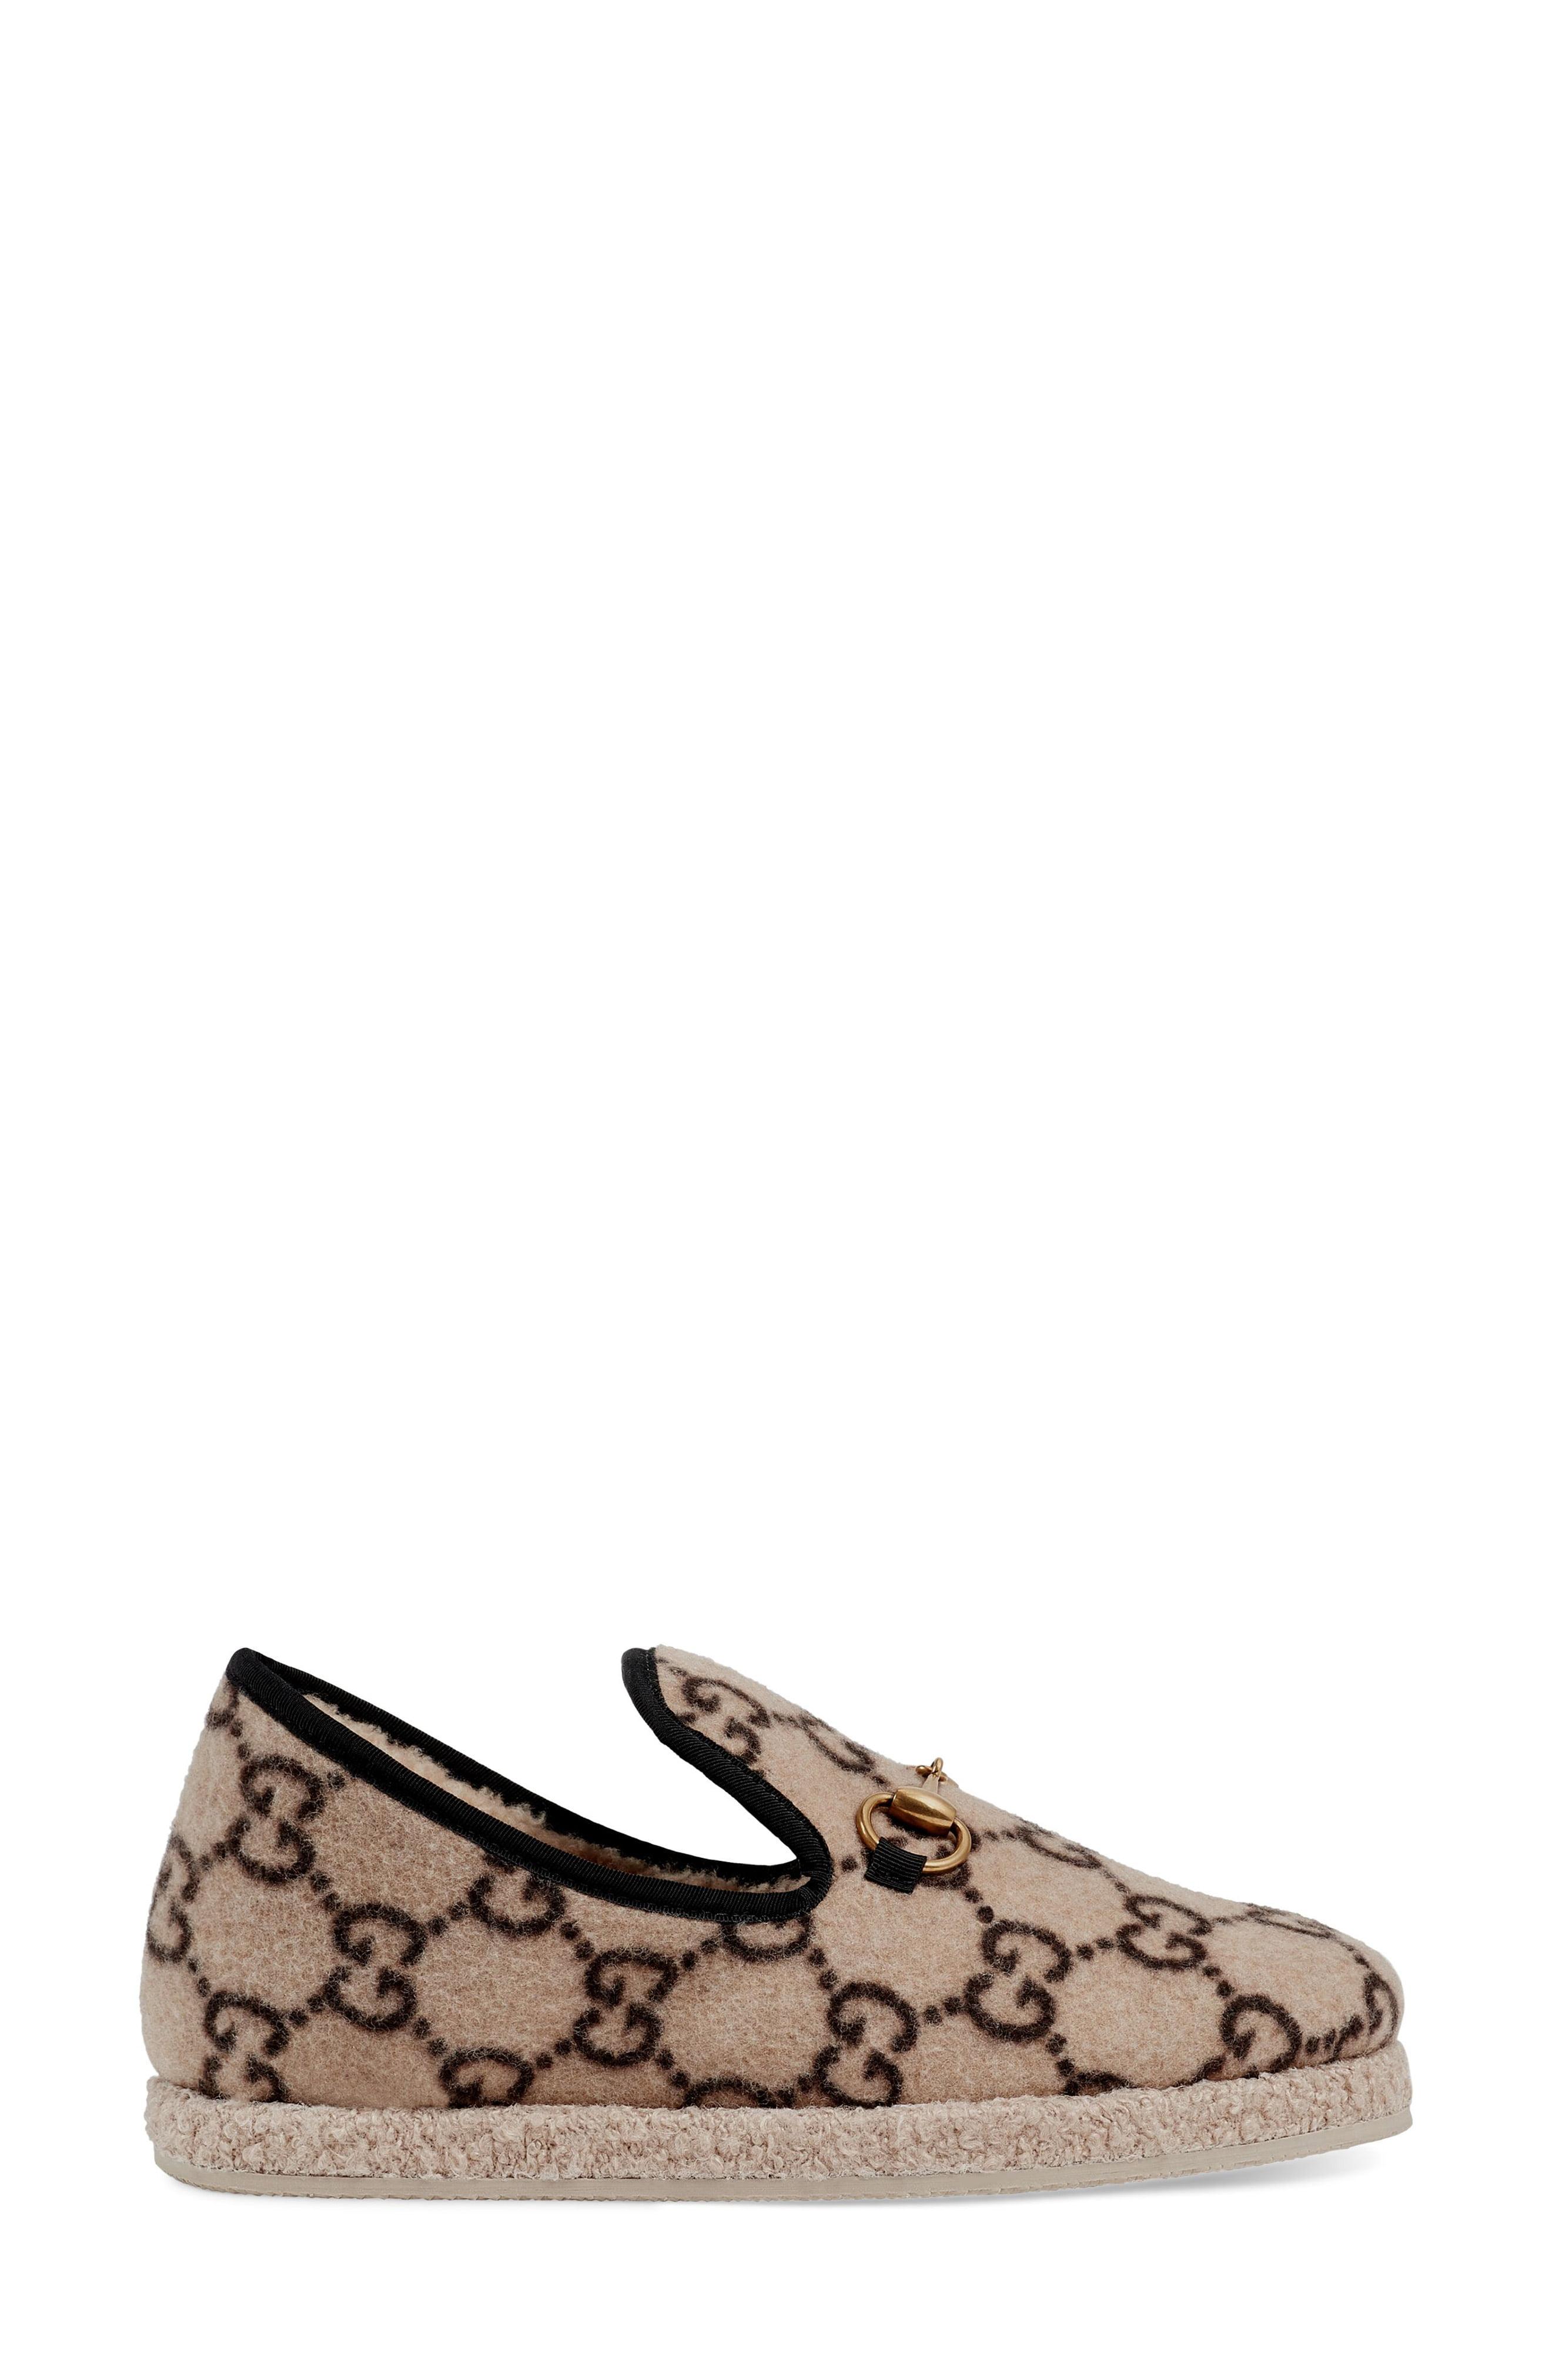 Gucci GG Wool Loafers In Beige in Natural | Lyst